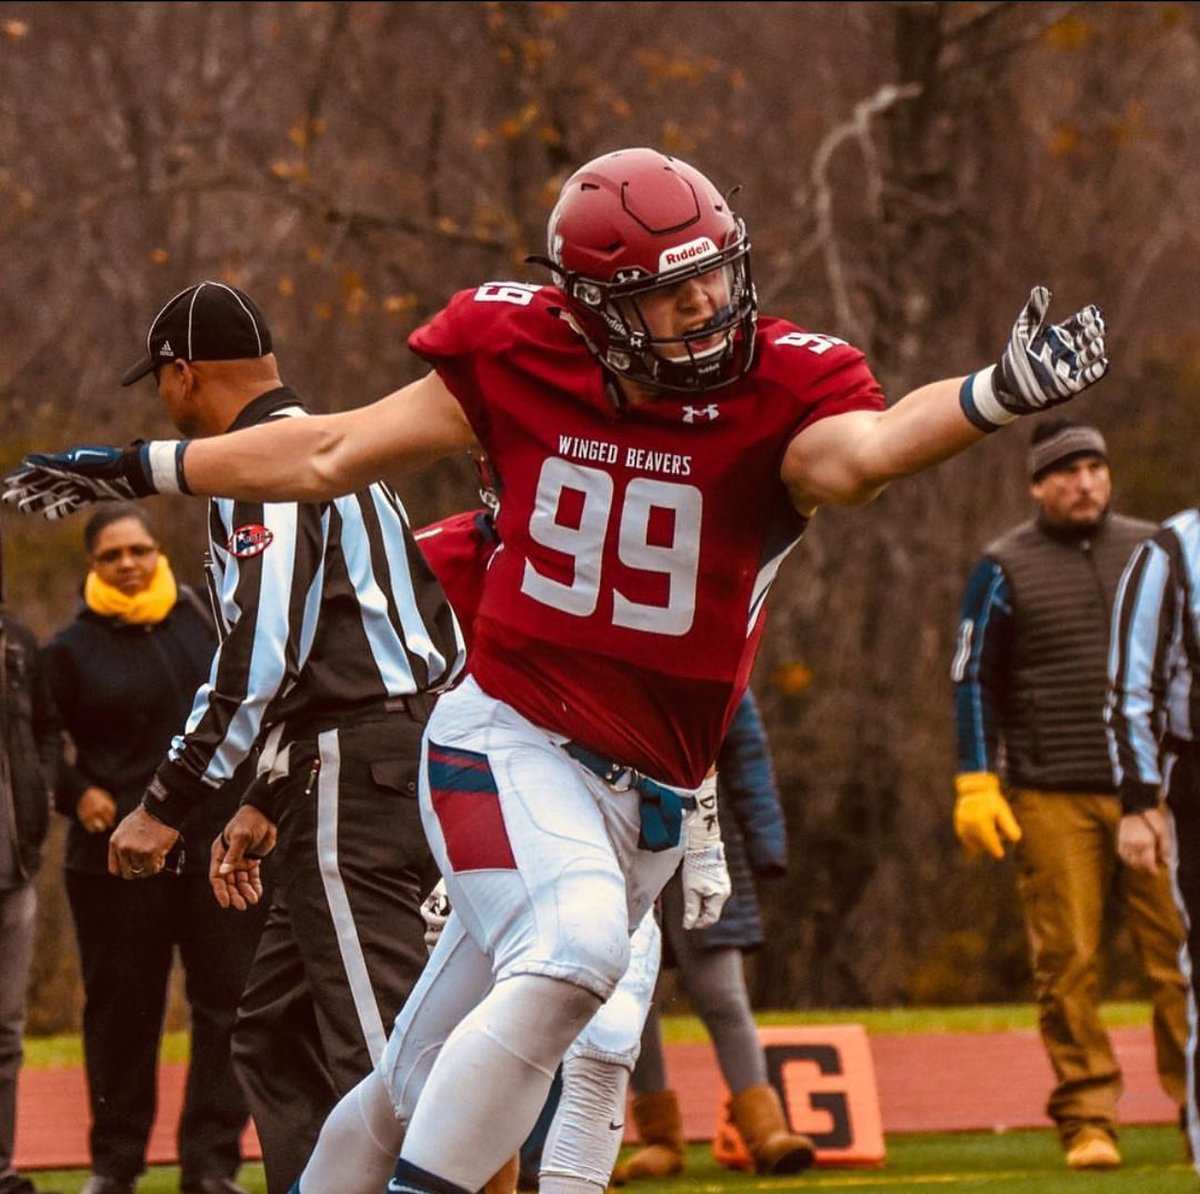 Congratulations to @caseyrogers99 on singing with the @nygiants. We’re happy for you Casey! #Wingedbeaver